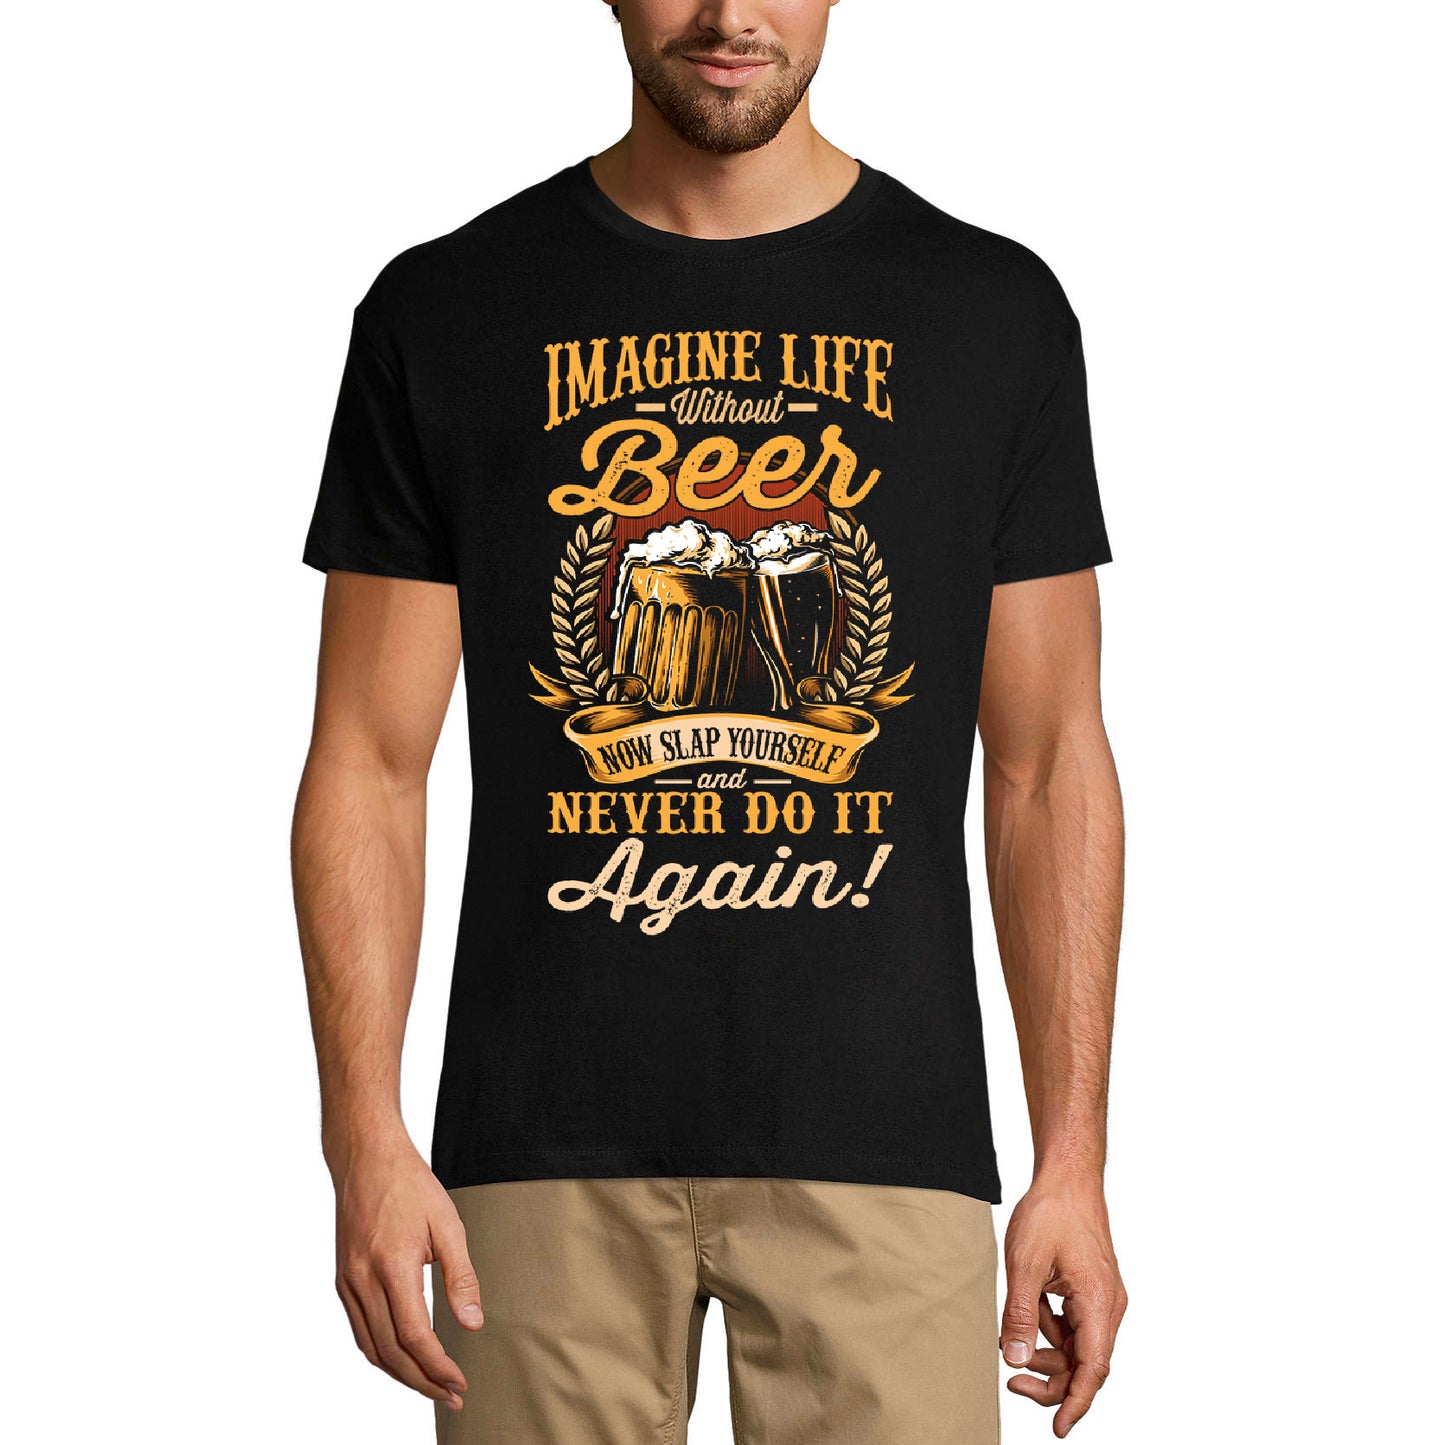 ULTRABASIC Men's Funny T-Shirt Imagine Life Without Beer Now Sleep Yourself and Never Do It Again